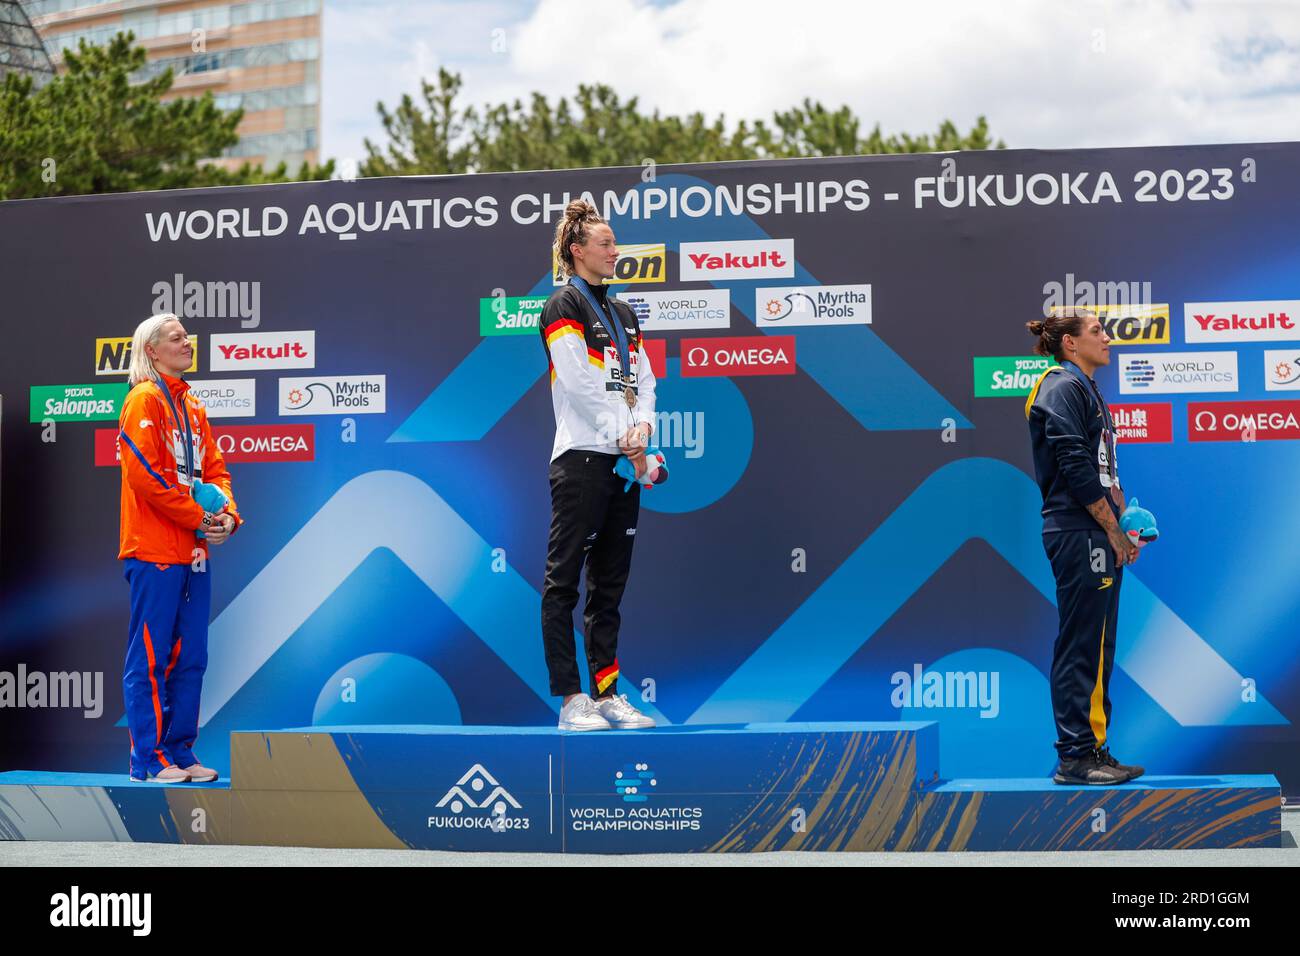 Fukuoka, Japan. 18th July, 2023. FUKUOKA, JAPAN - JULY 18: Sharon van Rouwendaal of the Netherlands, Leonie Beck of Germany and Ana Marcela Cunha of Brasil during the podium ceremony after competing in Open Water Women's 5km on Day 5 of the Fukuoka 2023 World Aquatics Championships at the Seaside Momochi Beach Park on July 18, 2023 in Fukuoka, Japan (Photo by Nikola Krstic/BSR Agency) Credit: BSR Agency/Alamy Live News Stock Photo